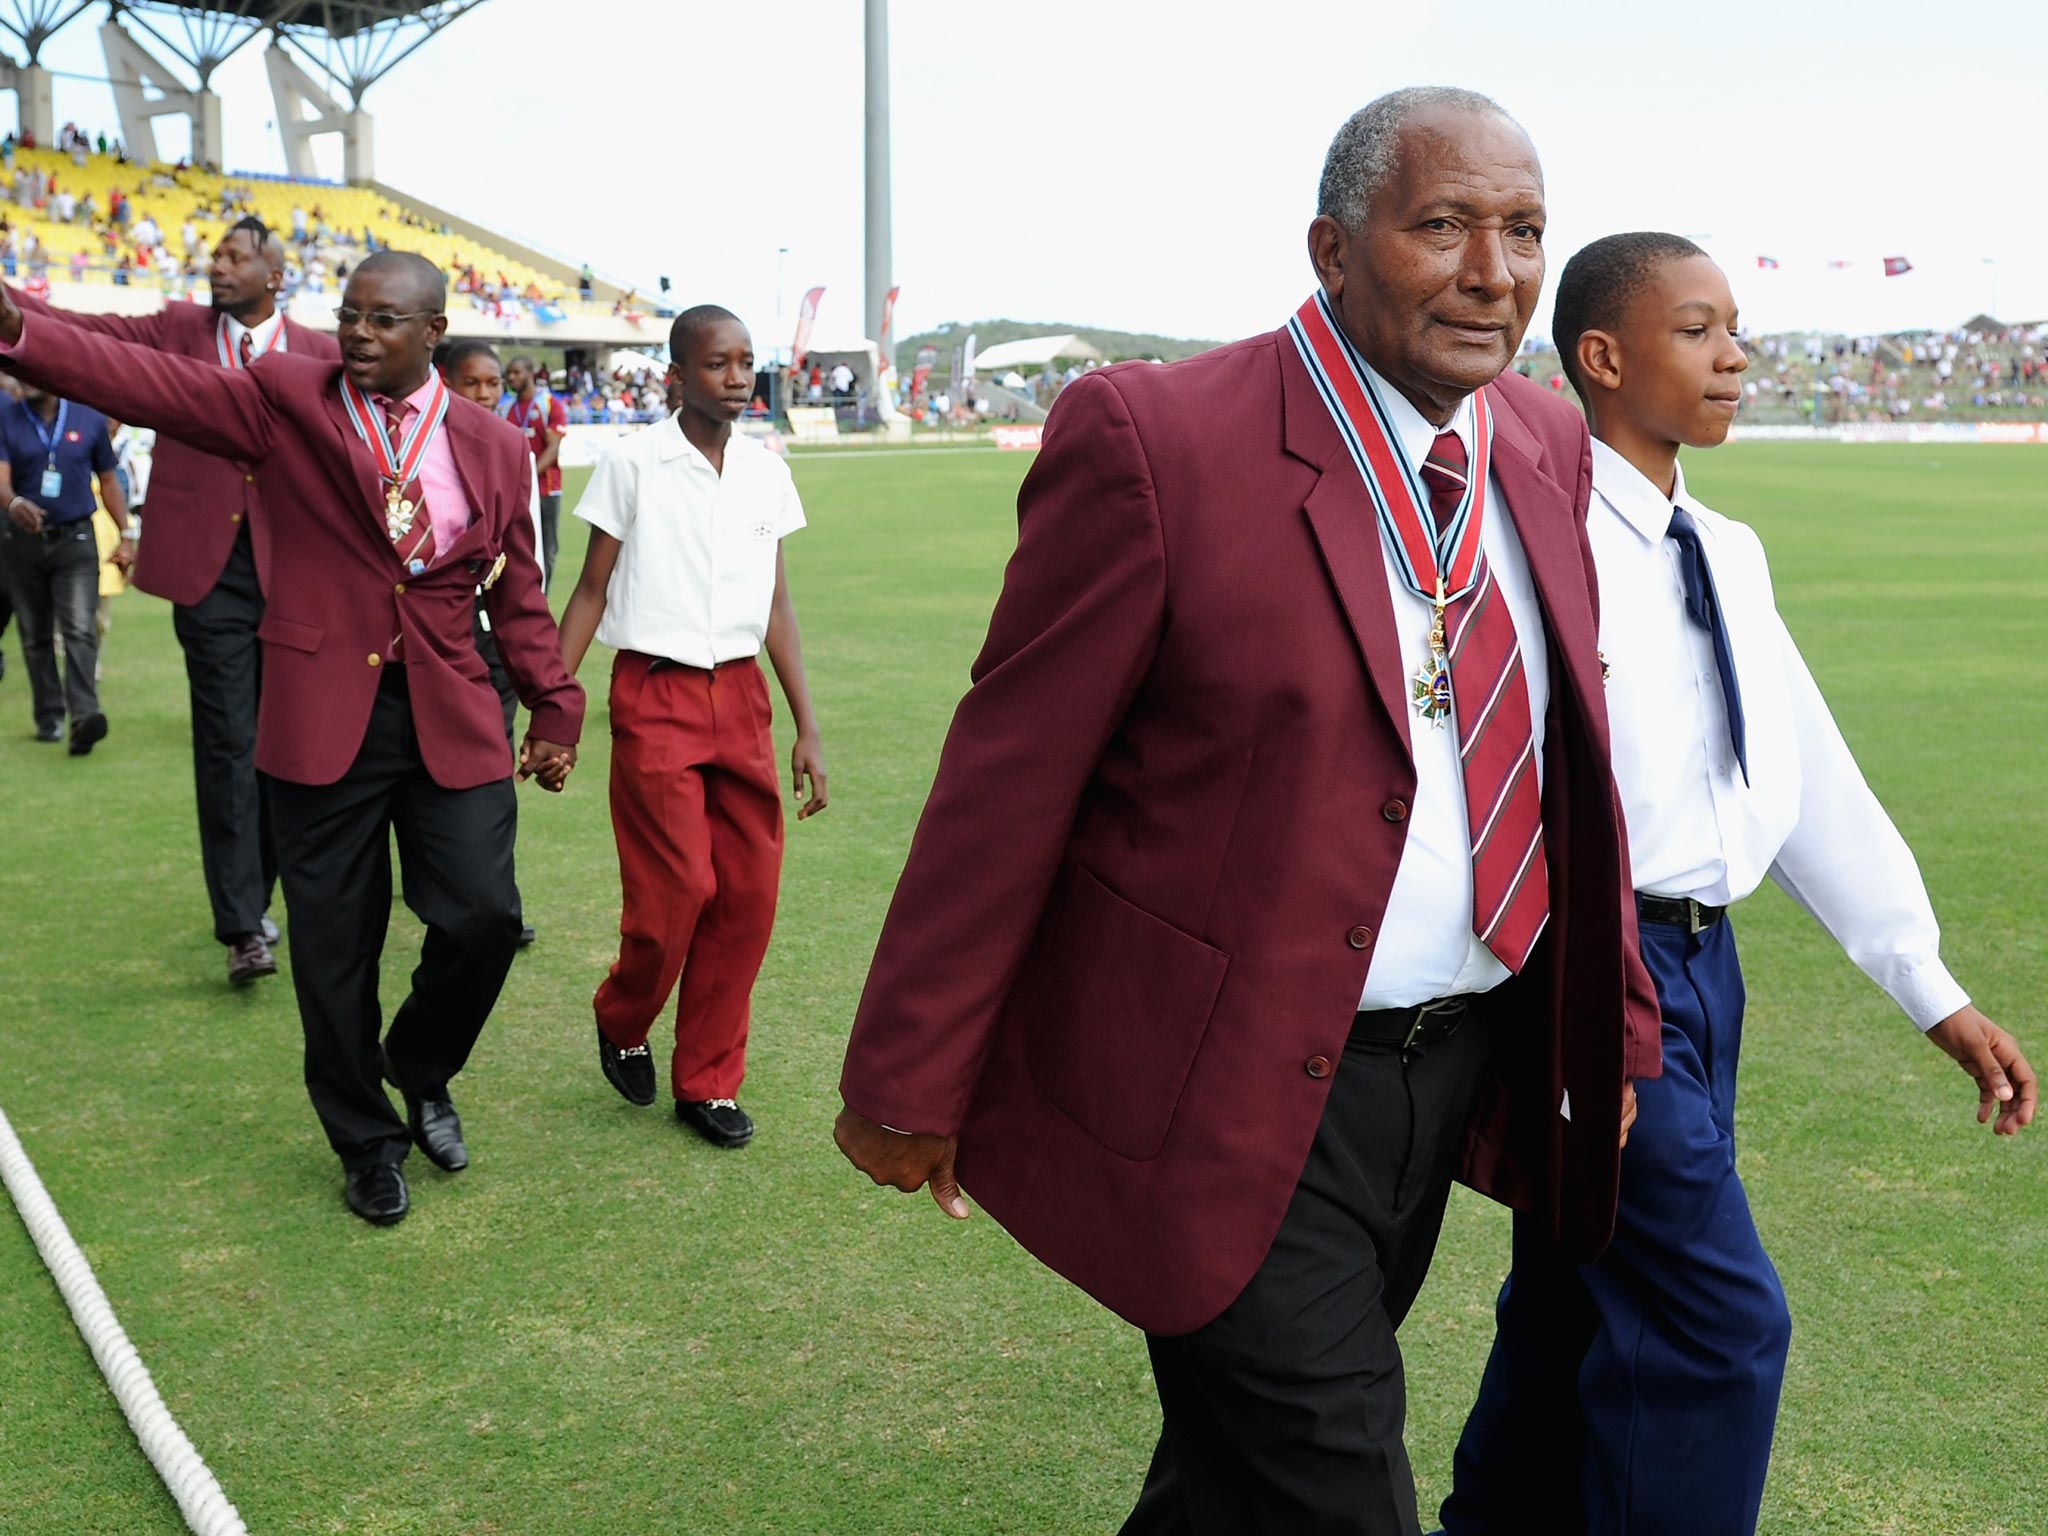 (From right) Andy Roberts, Richie Richardson and Curtly Ambrose are paraded round the field after being awarded knighthoods during the lunch break of the first ODI between West Indies and England in Antigua yesterday